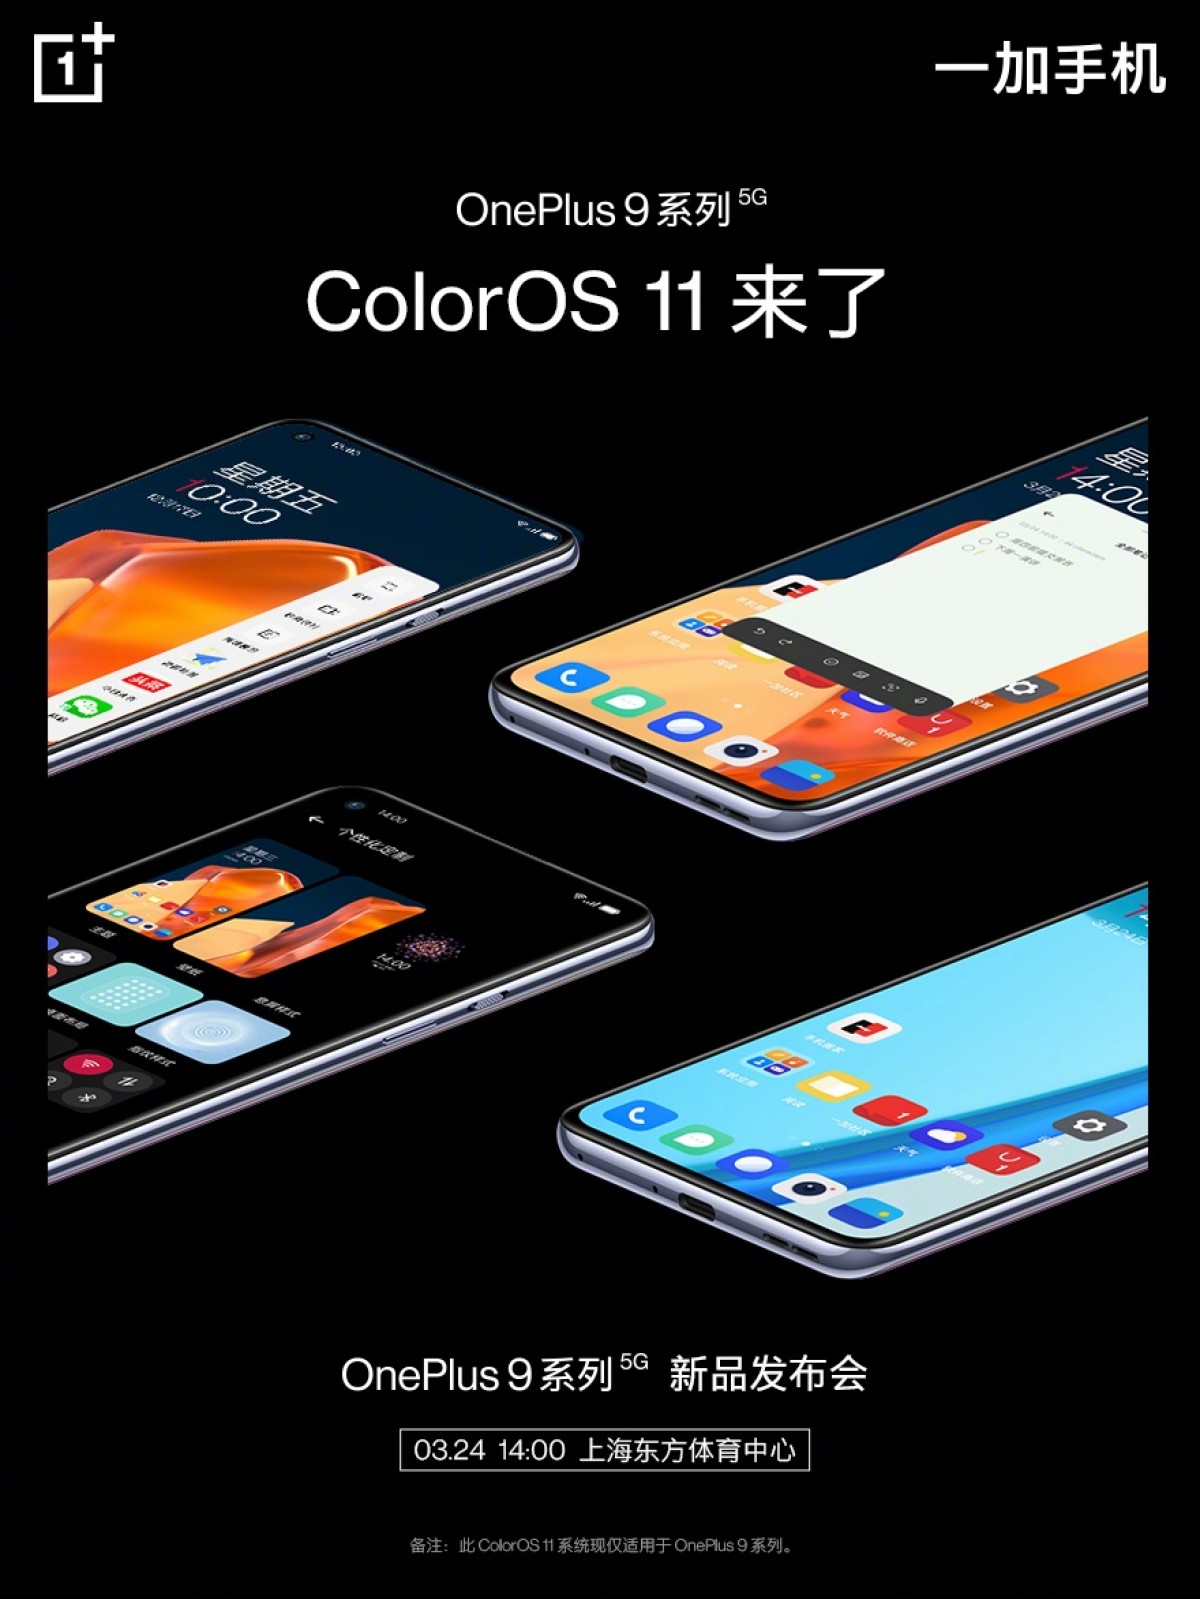 OnePlus 9 series to arrive with ColorOS 11 in China, global units will stick to OxygenOS